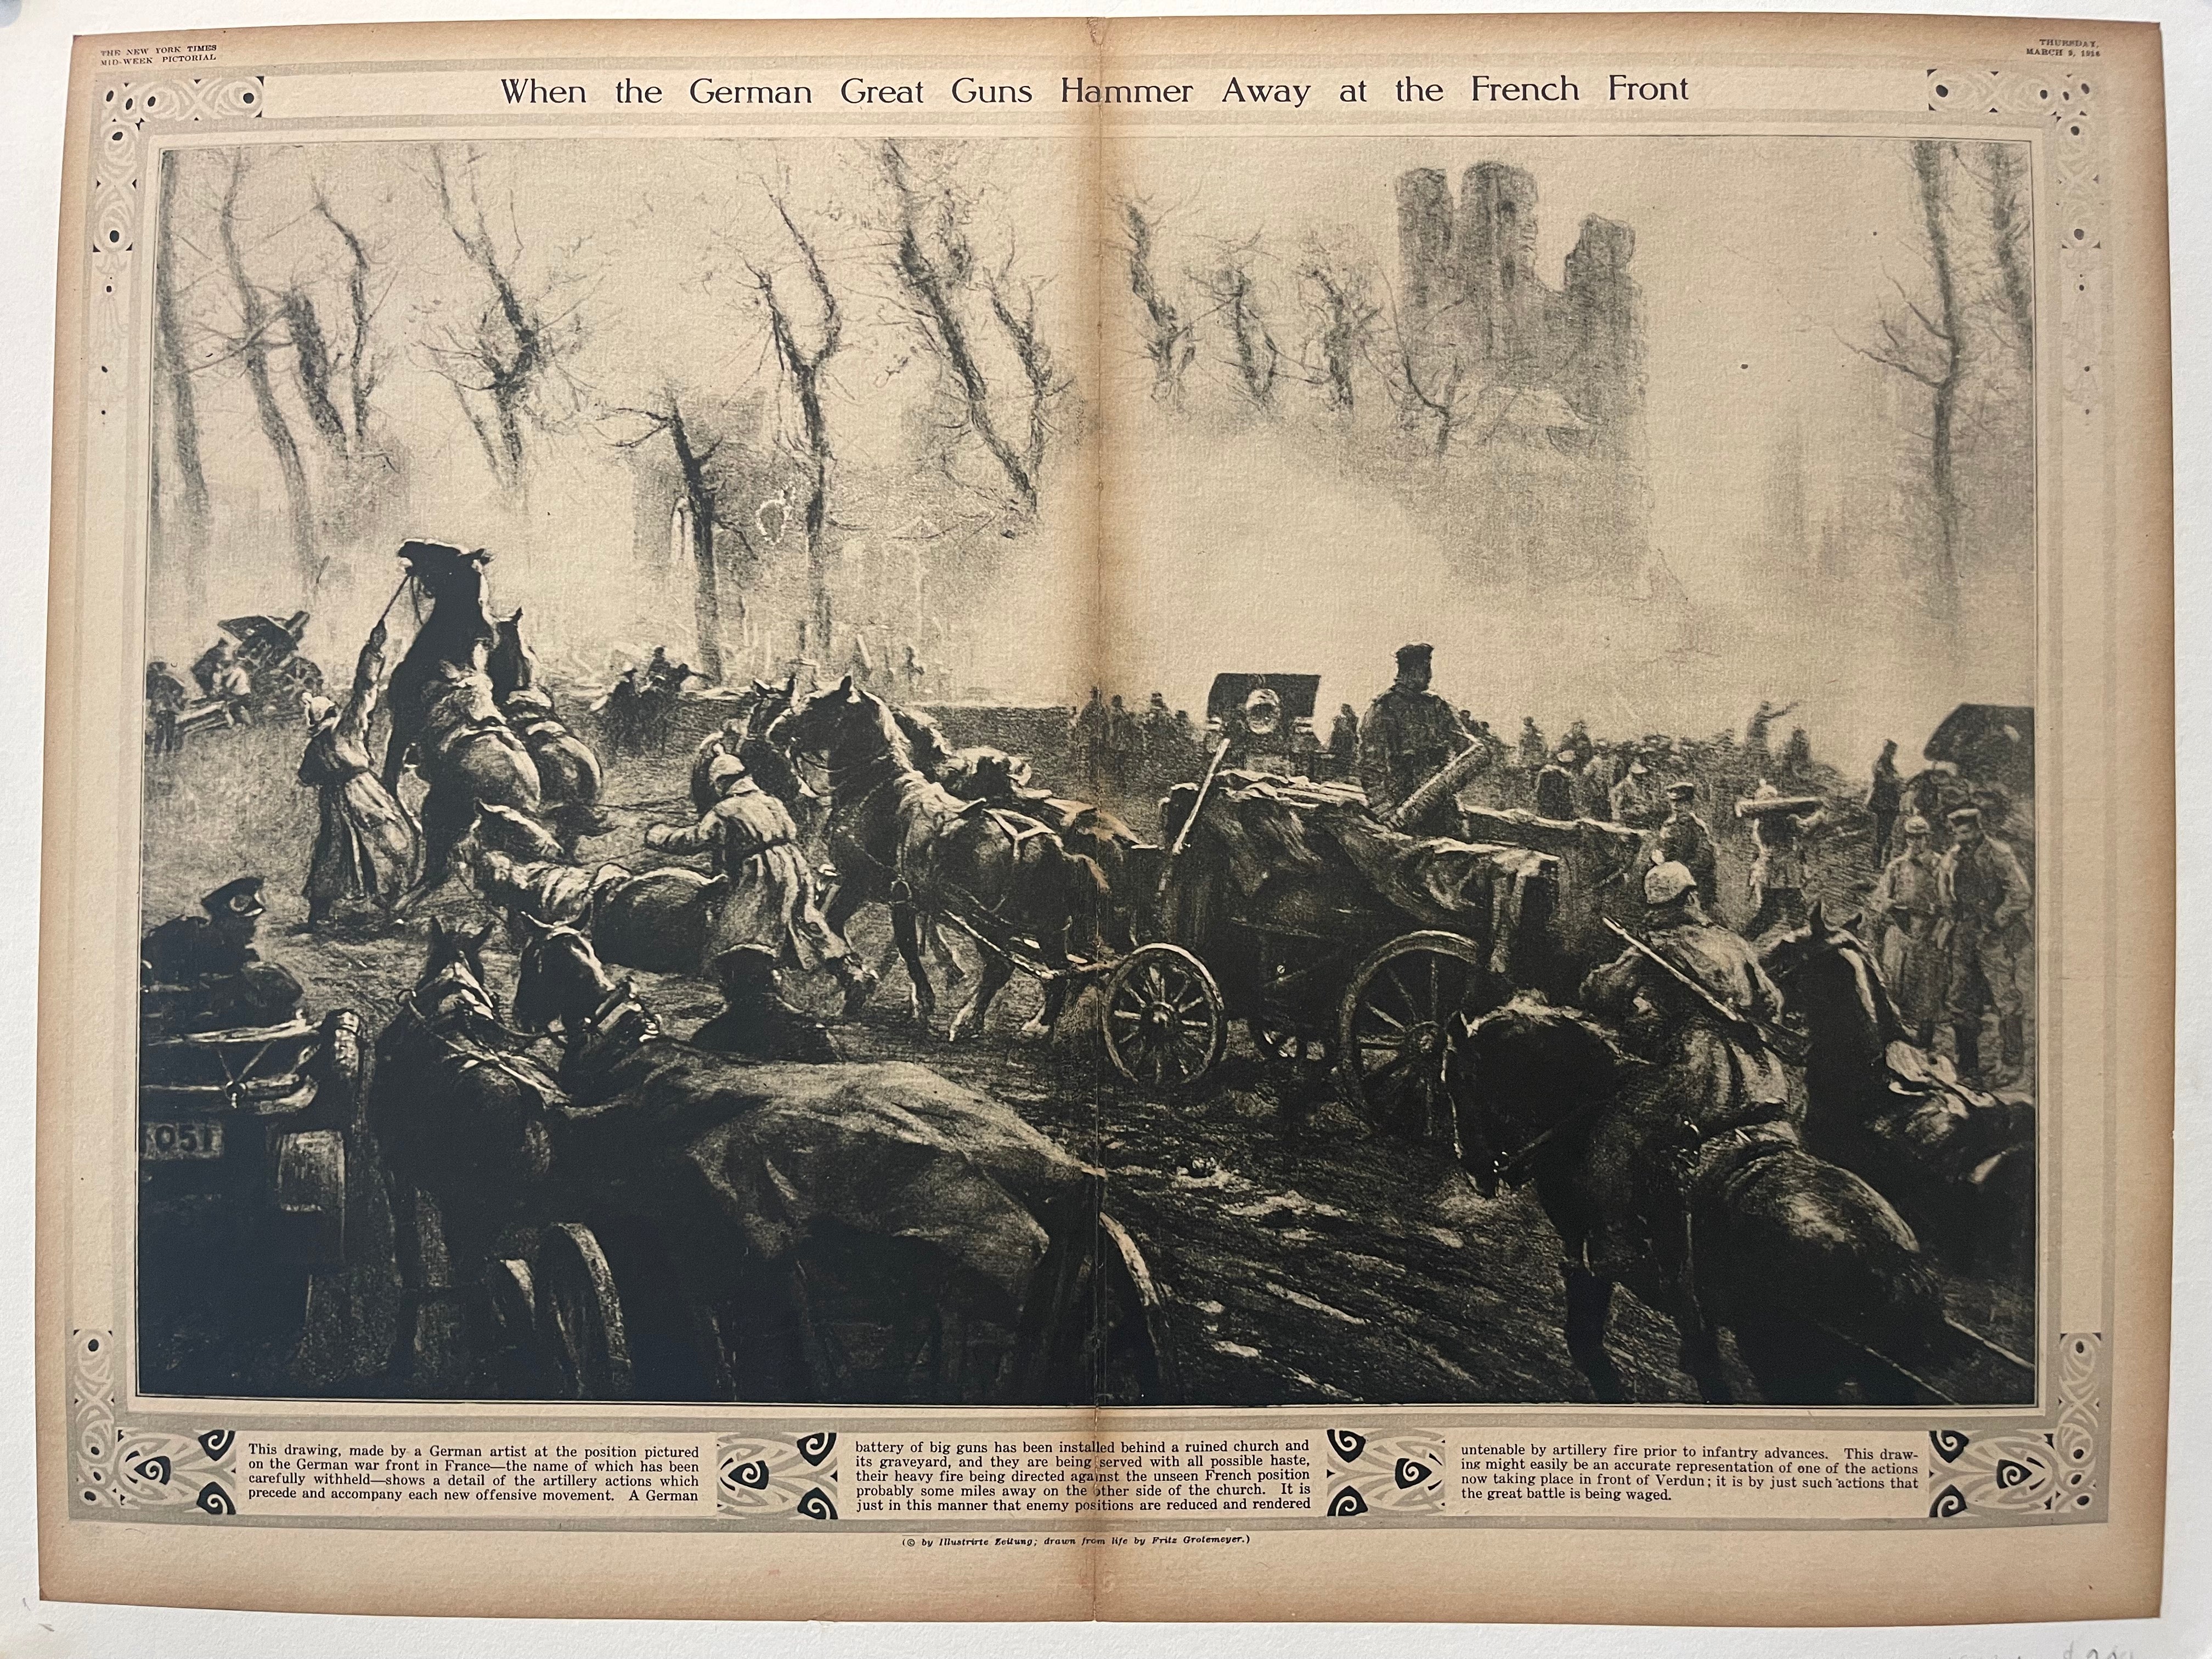 1916 New York Times Mid-Week Pictorial